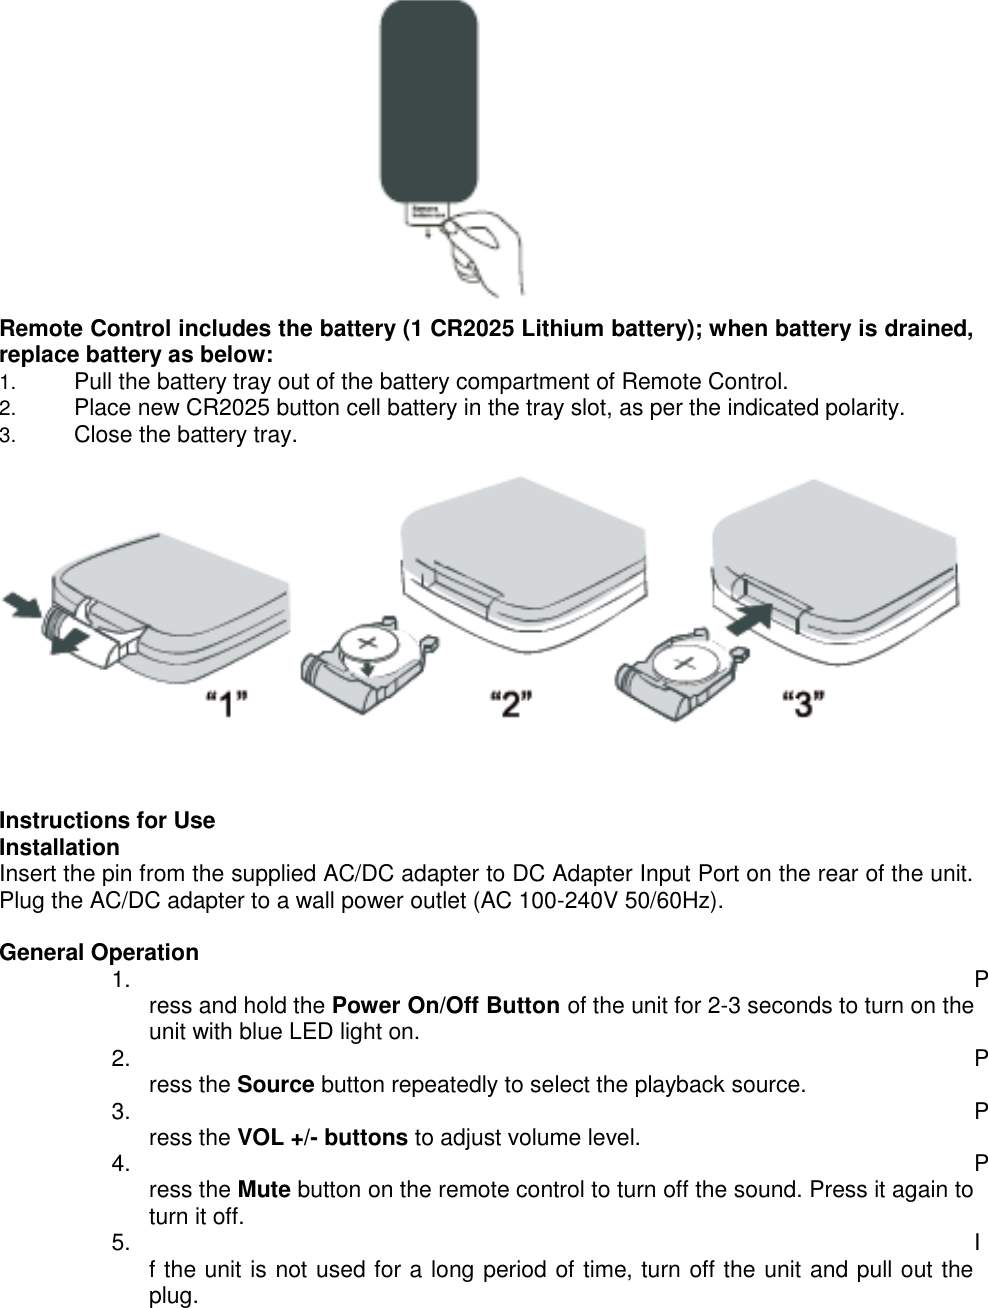                                                                            Remote Control includes the battery (1 CR2025 Lithium battery); when battery is drained, replace battery as below:  1. Pull the battery tray out of the battery compartment of Remote Control. 2. Place new CR2025 button cell battery in the tray slot, as per the indicated polarity. 3. Close the battery tray.        Instructions for Use Installation Insert the pin from the supplied AC/DC adapter to DC Adapter Input Port on the rear of the unit. Plug the AC/DC adapter to a wall power outlet (AC 100-240V 50/60Hz).  General Operation 1.  Press and hold the Power On/Off Button of the unit for 2-3 seconds to turn on the unit with blue LED light on. 2.  Press the Source button repeatedly to select the playback source. 3.  Press the VOL +/- buttons to adjust volume level. 4.  Press the Mute button on the remote control to turn off the sound. Press it again to turn it off. 5.  If the unit is not used for a long period of time, turn off the unit and pull out the plug.  